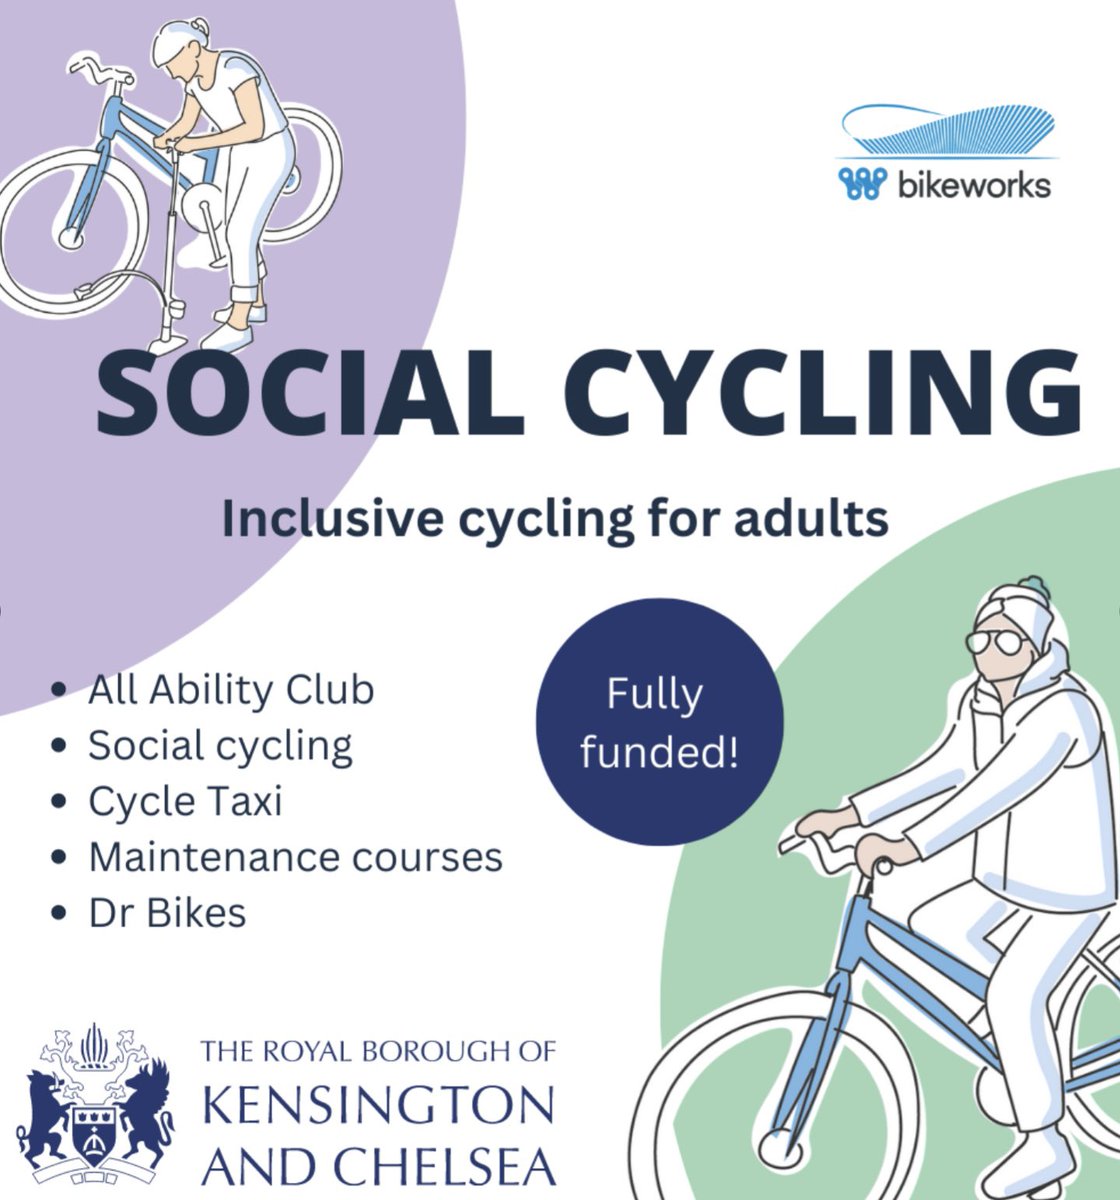 Do you live in Kensington and Chelsea? Have you always wanted to get into cycling or improve your current ability? Take a look the @bikeworksuk Social Cycling project which includes an assortment of @kensingtonandchelseacouncil funded cycling activities.